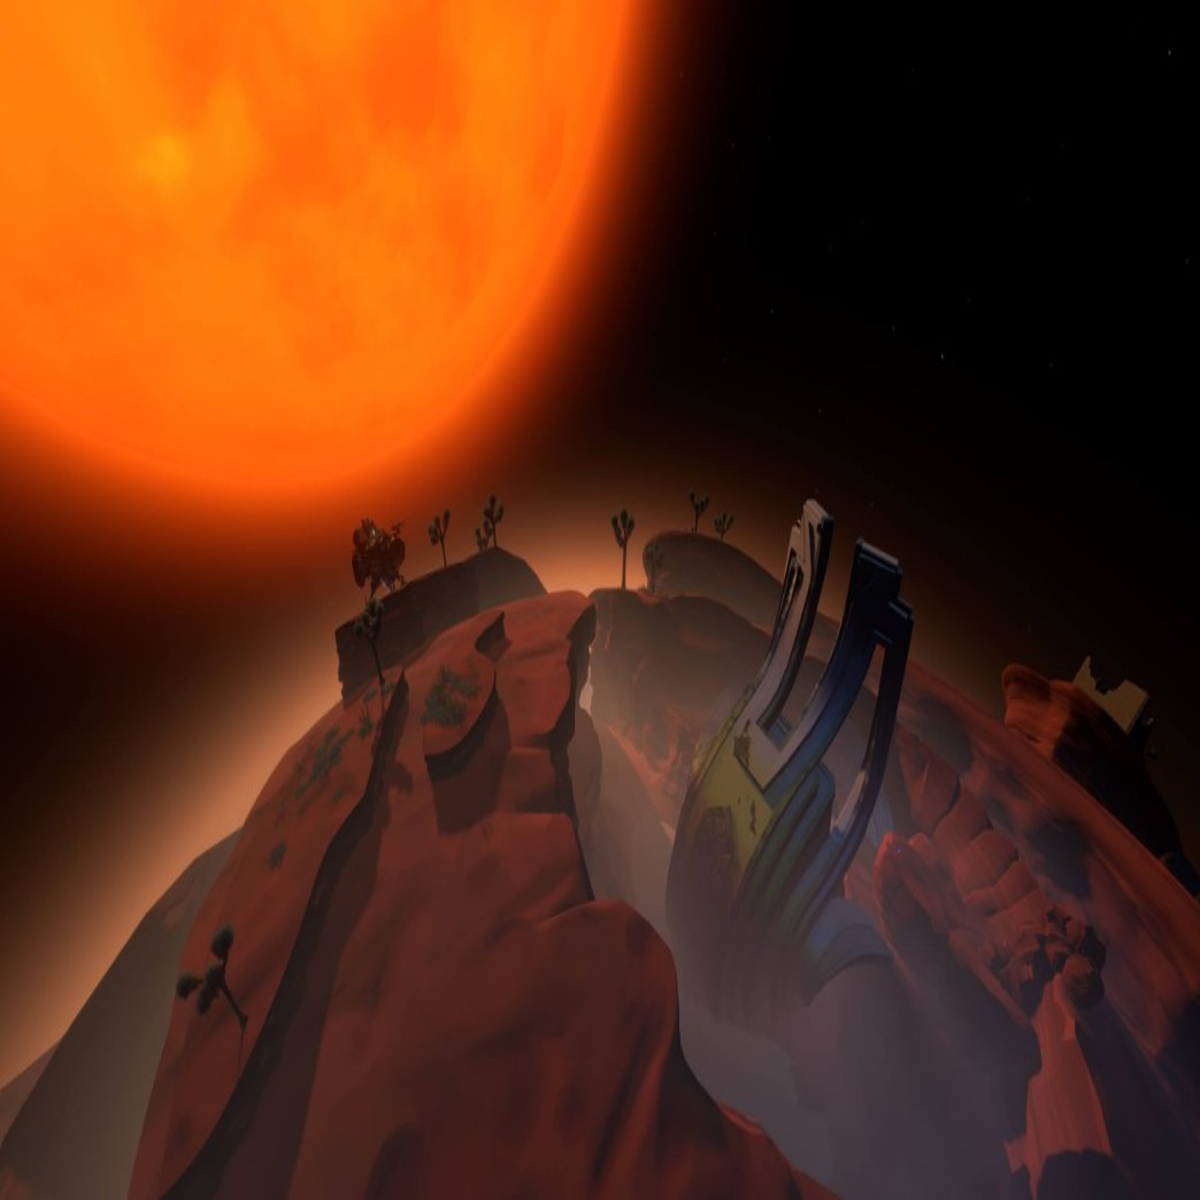 Outer Wilds 2 - News and what we'd love to see